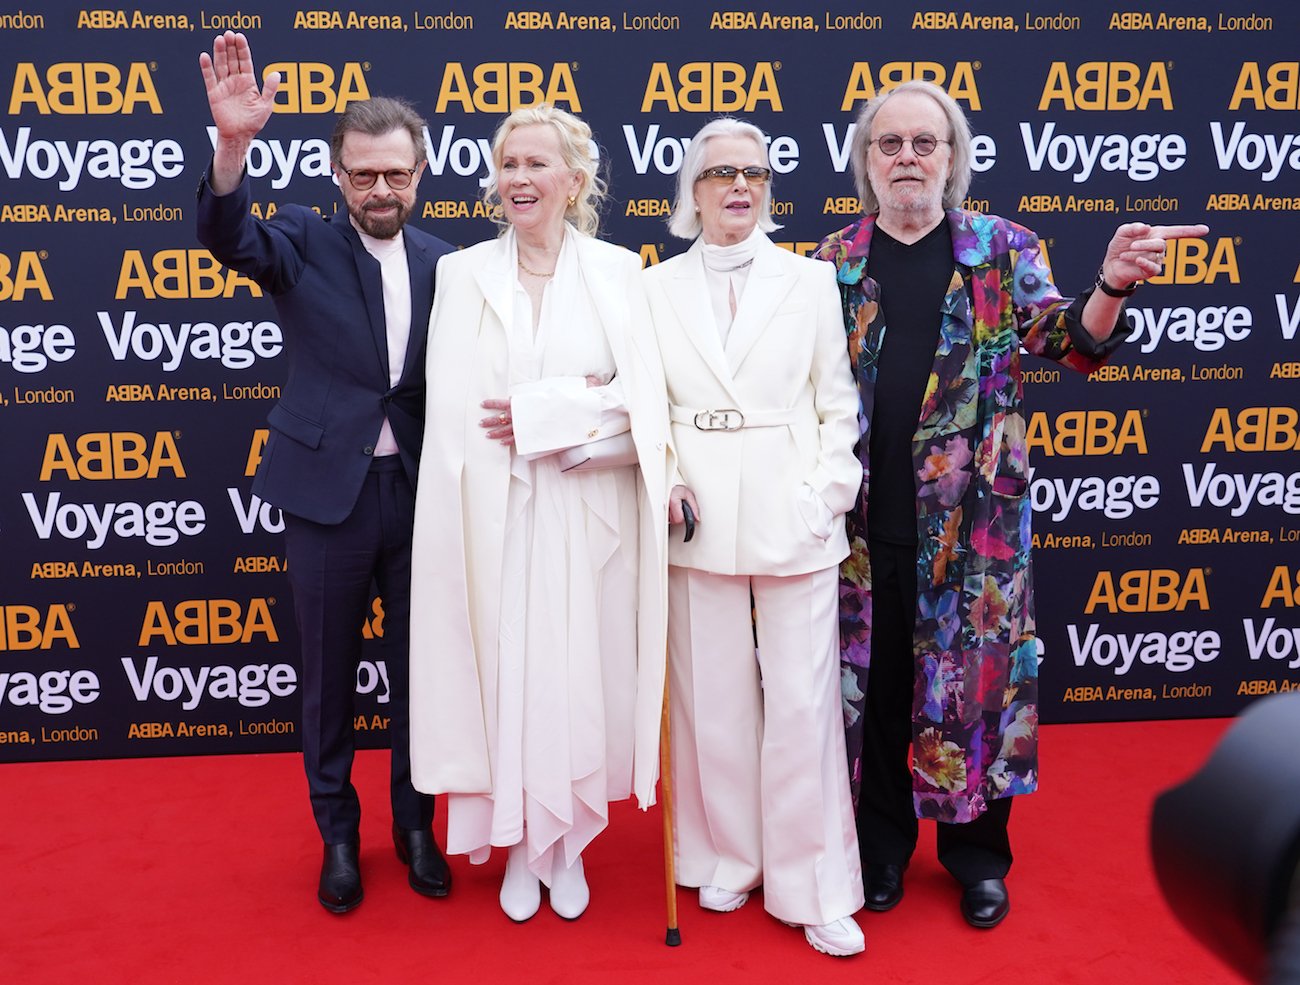 ABBA at the launch of their 'Voyage' performances in London, 2022.